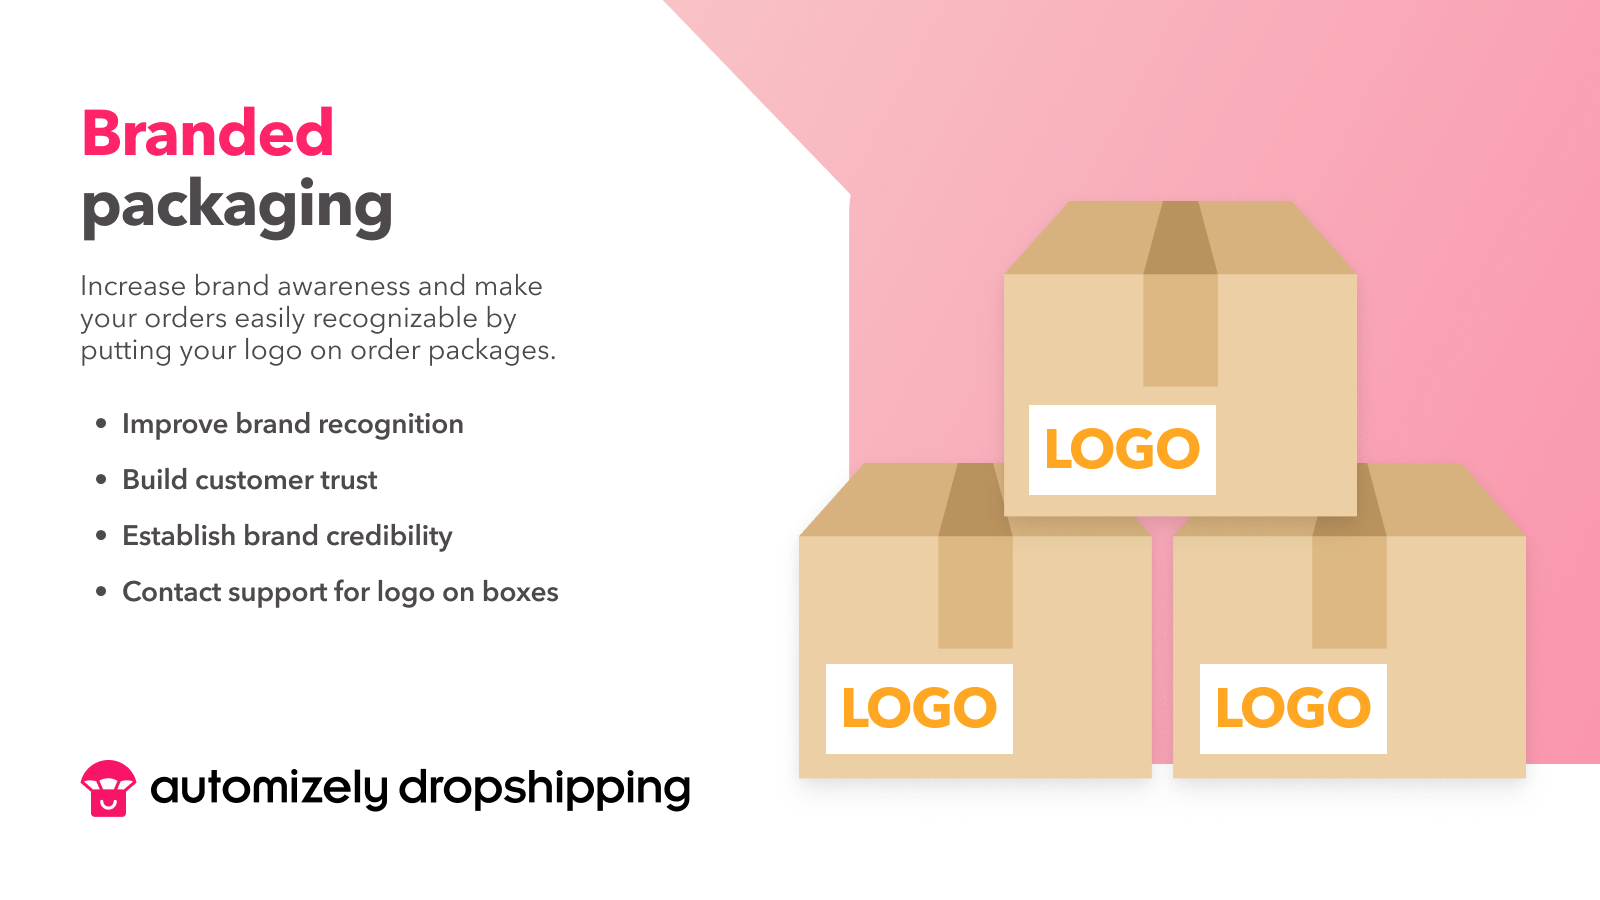 Get your brand logo on order packages 